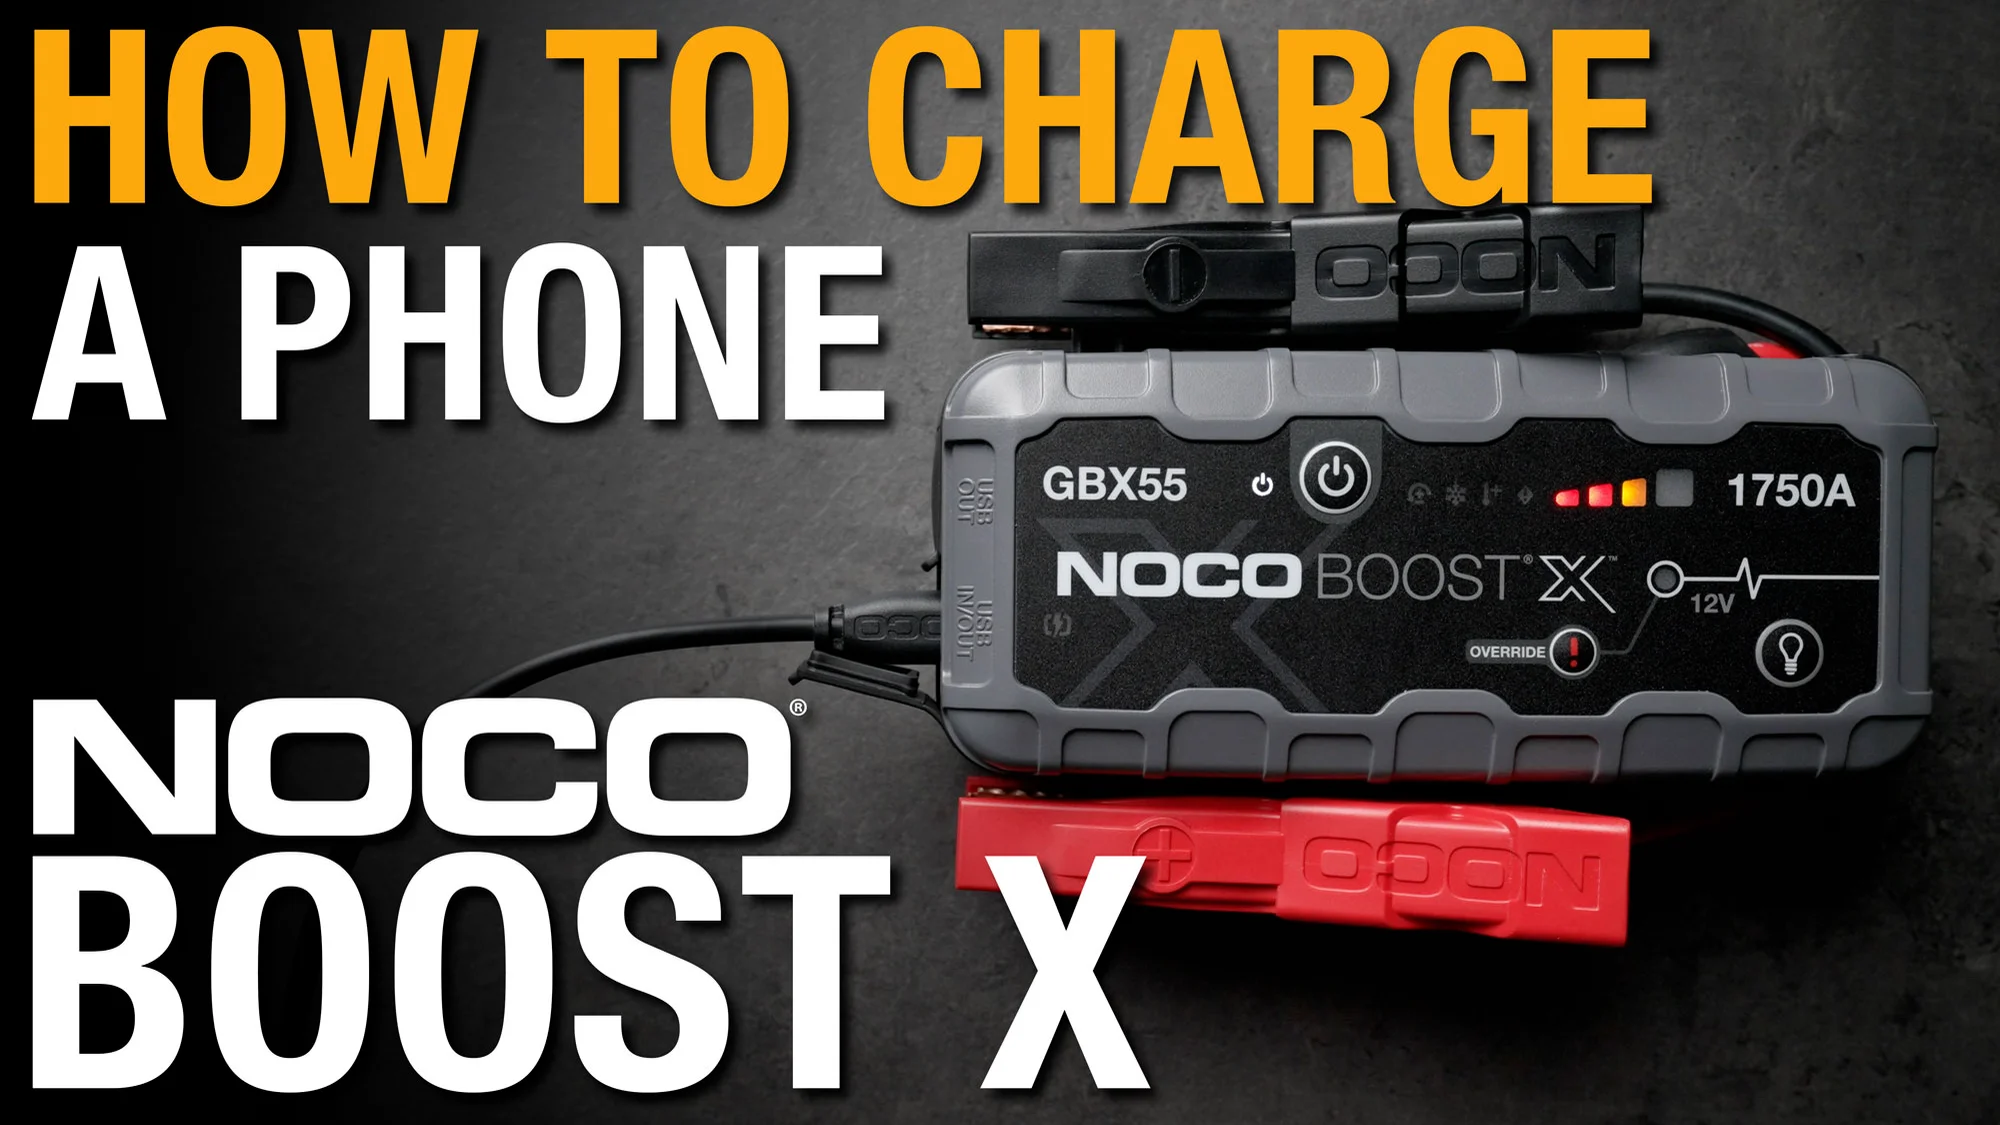 How to Charge a Phone using NOCO Boost X on Vimeo